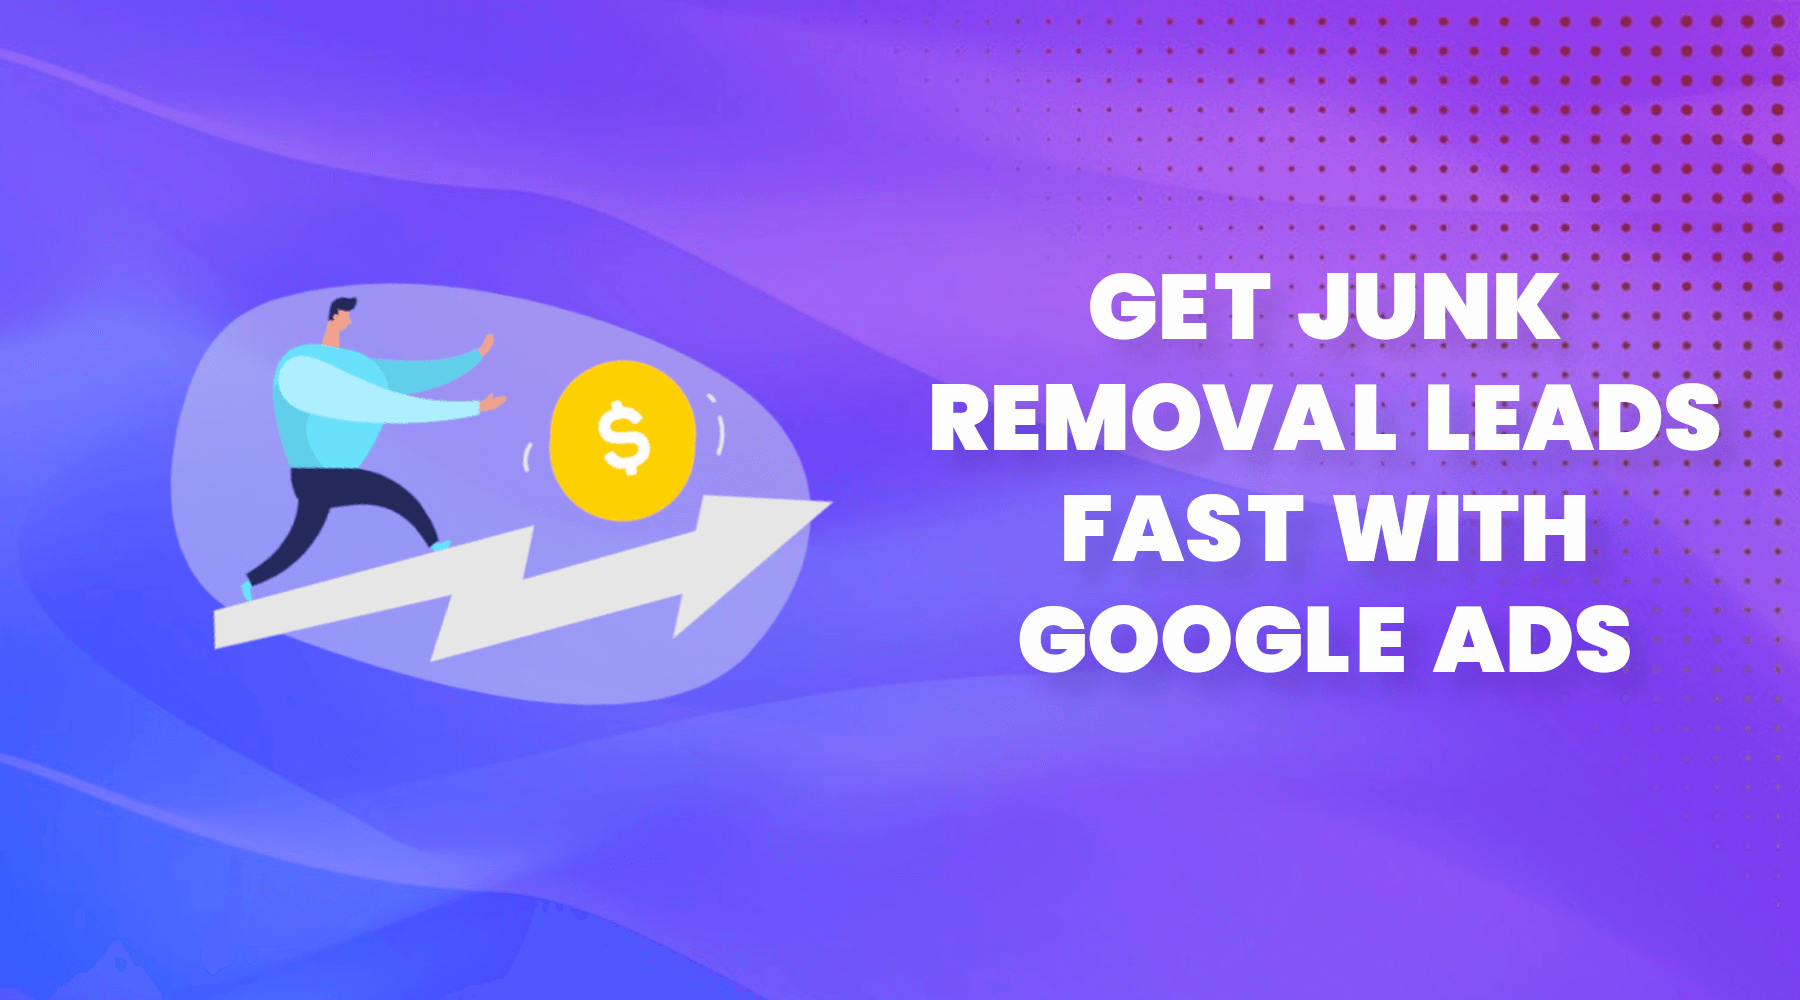 Google Ads for Junk Removal